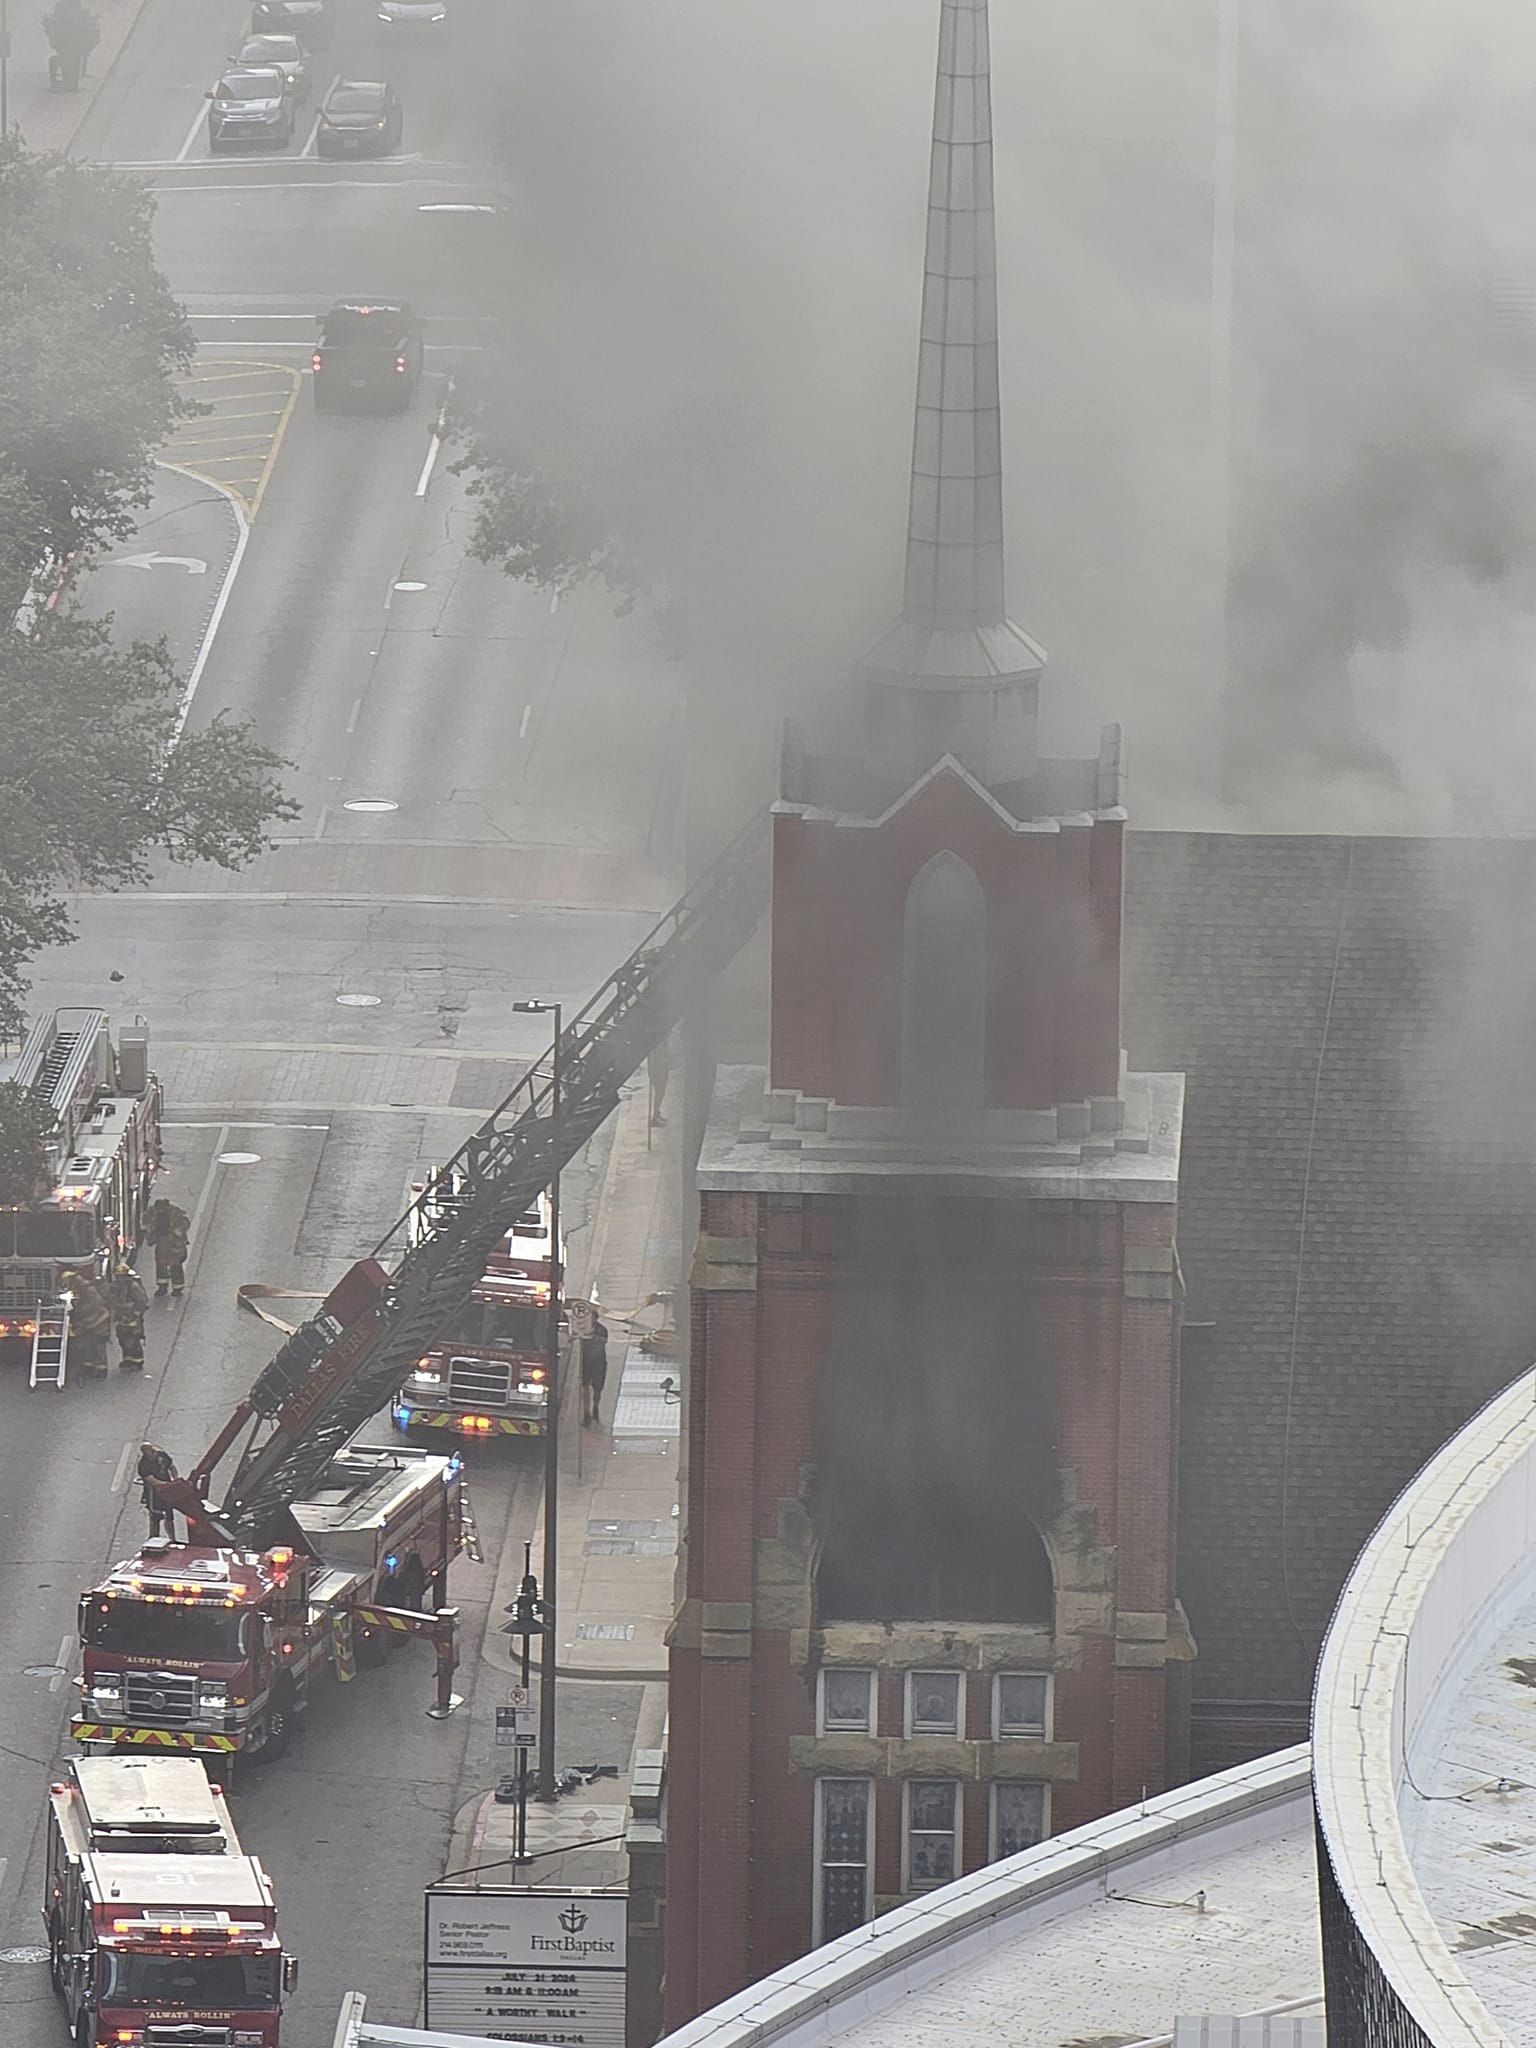 Firefighters battling fire at the First Baptist Church in Downtown Dallas, Texas